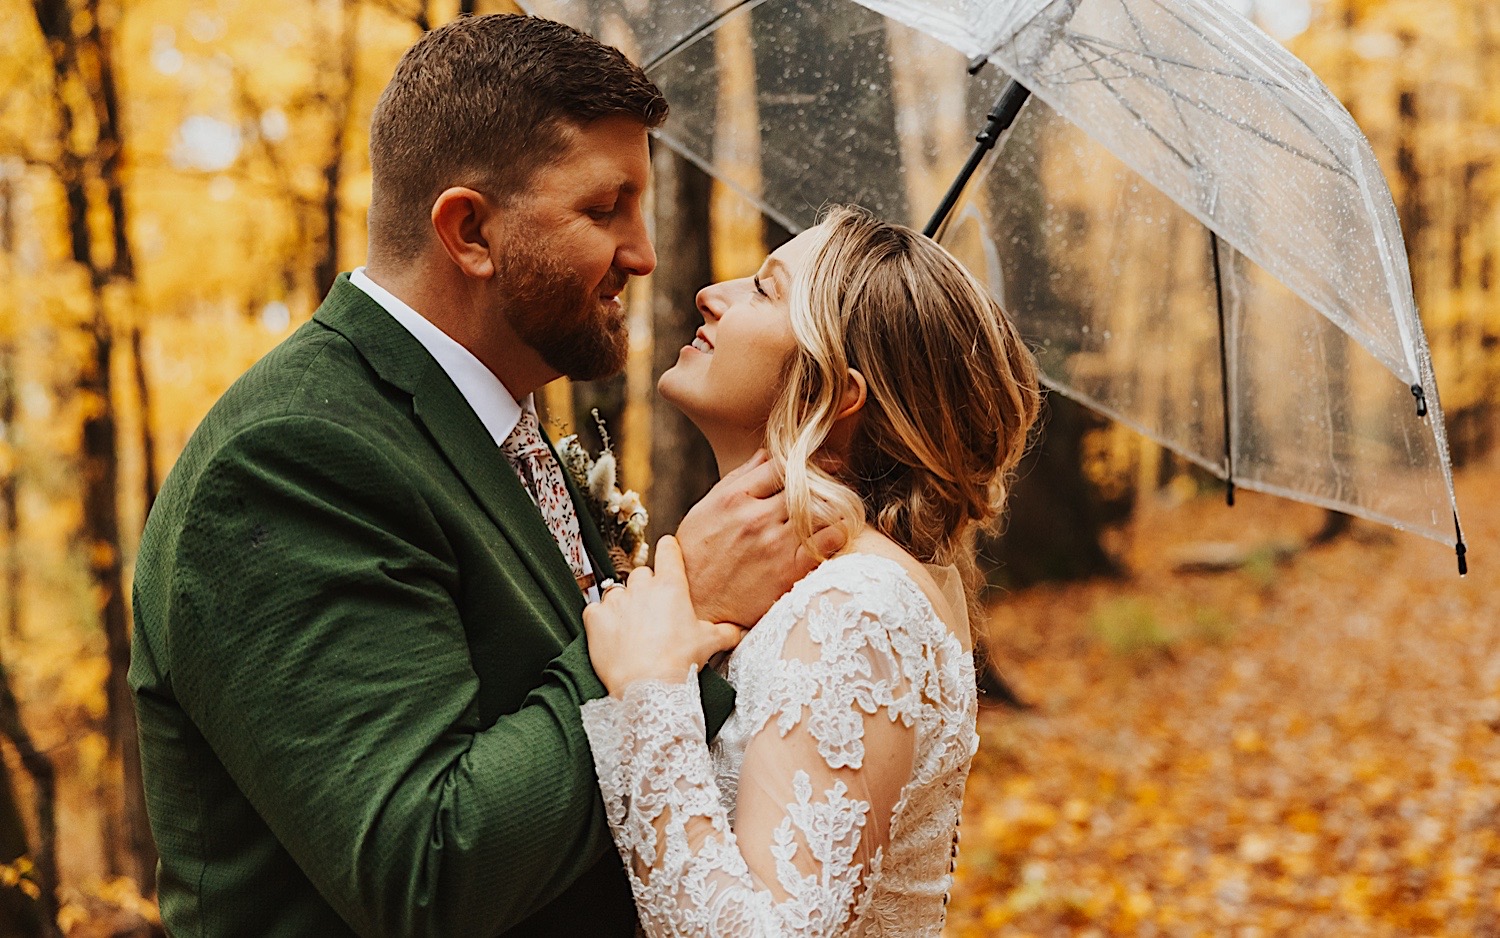 A bride and groom smile at one another while under an umbrella in a leaf covered forest during their wedding day at Lake Bomoseen Lodge in Vermont